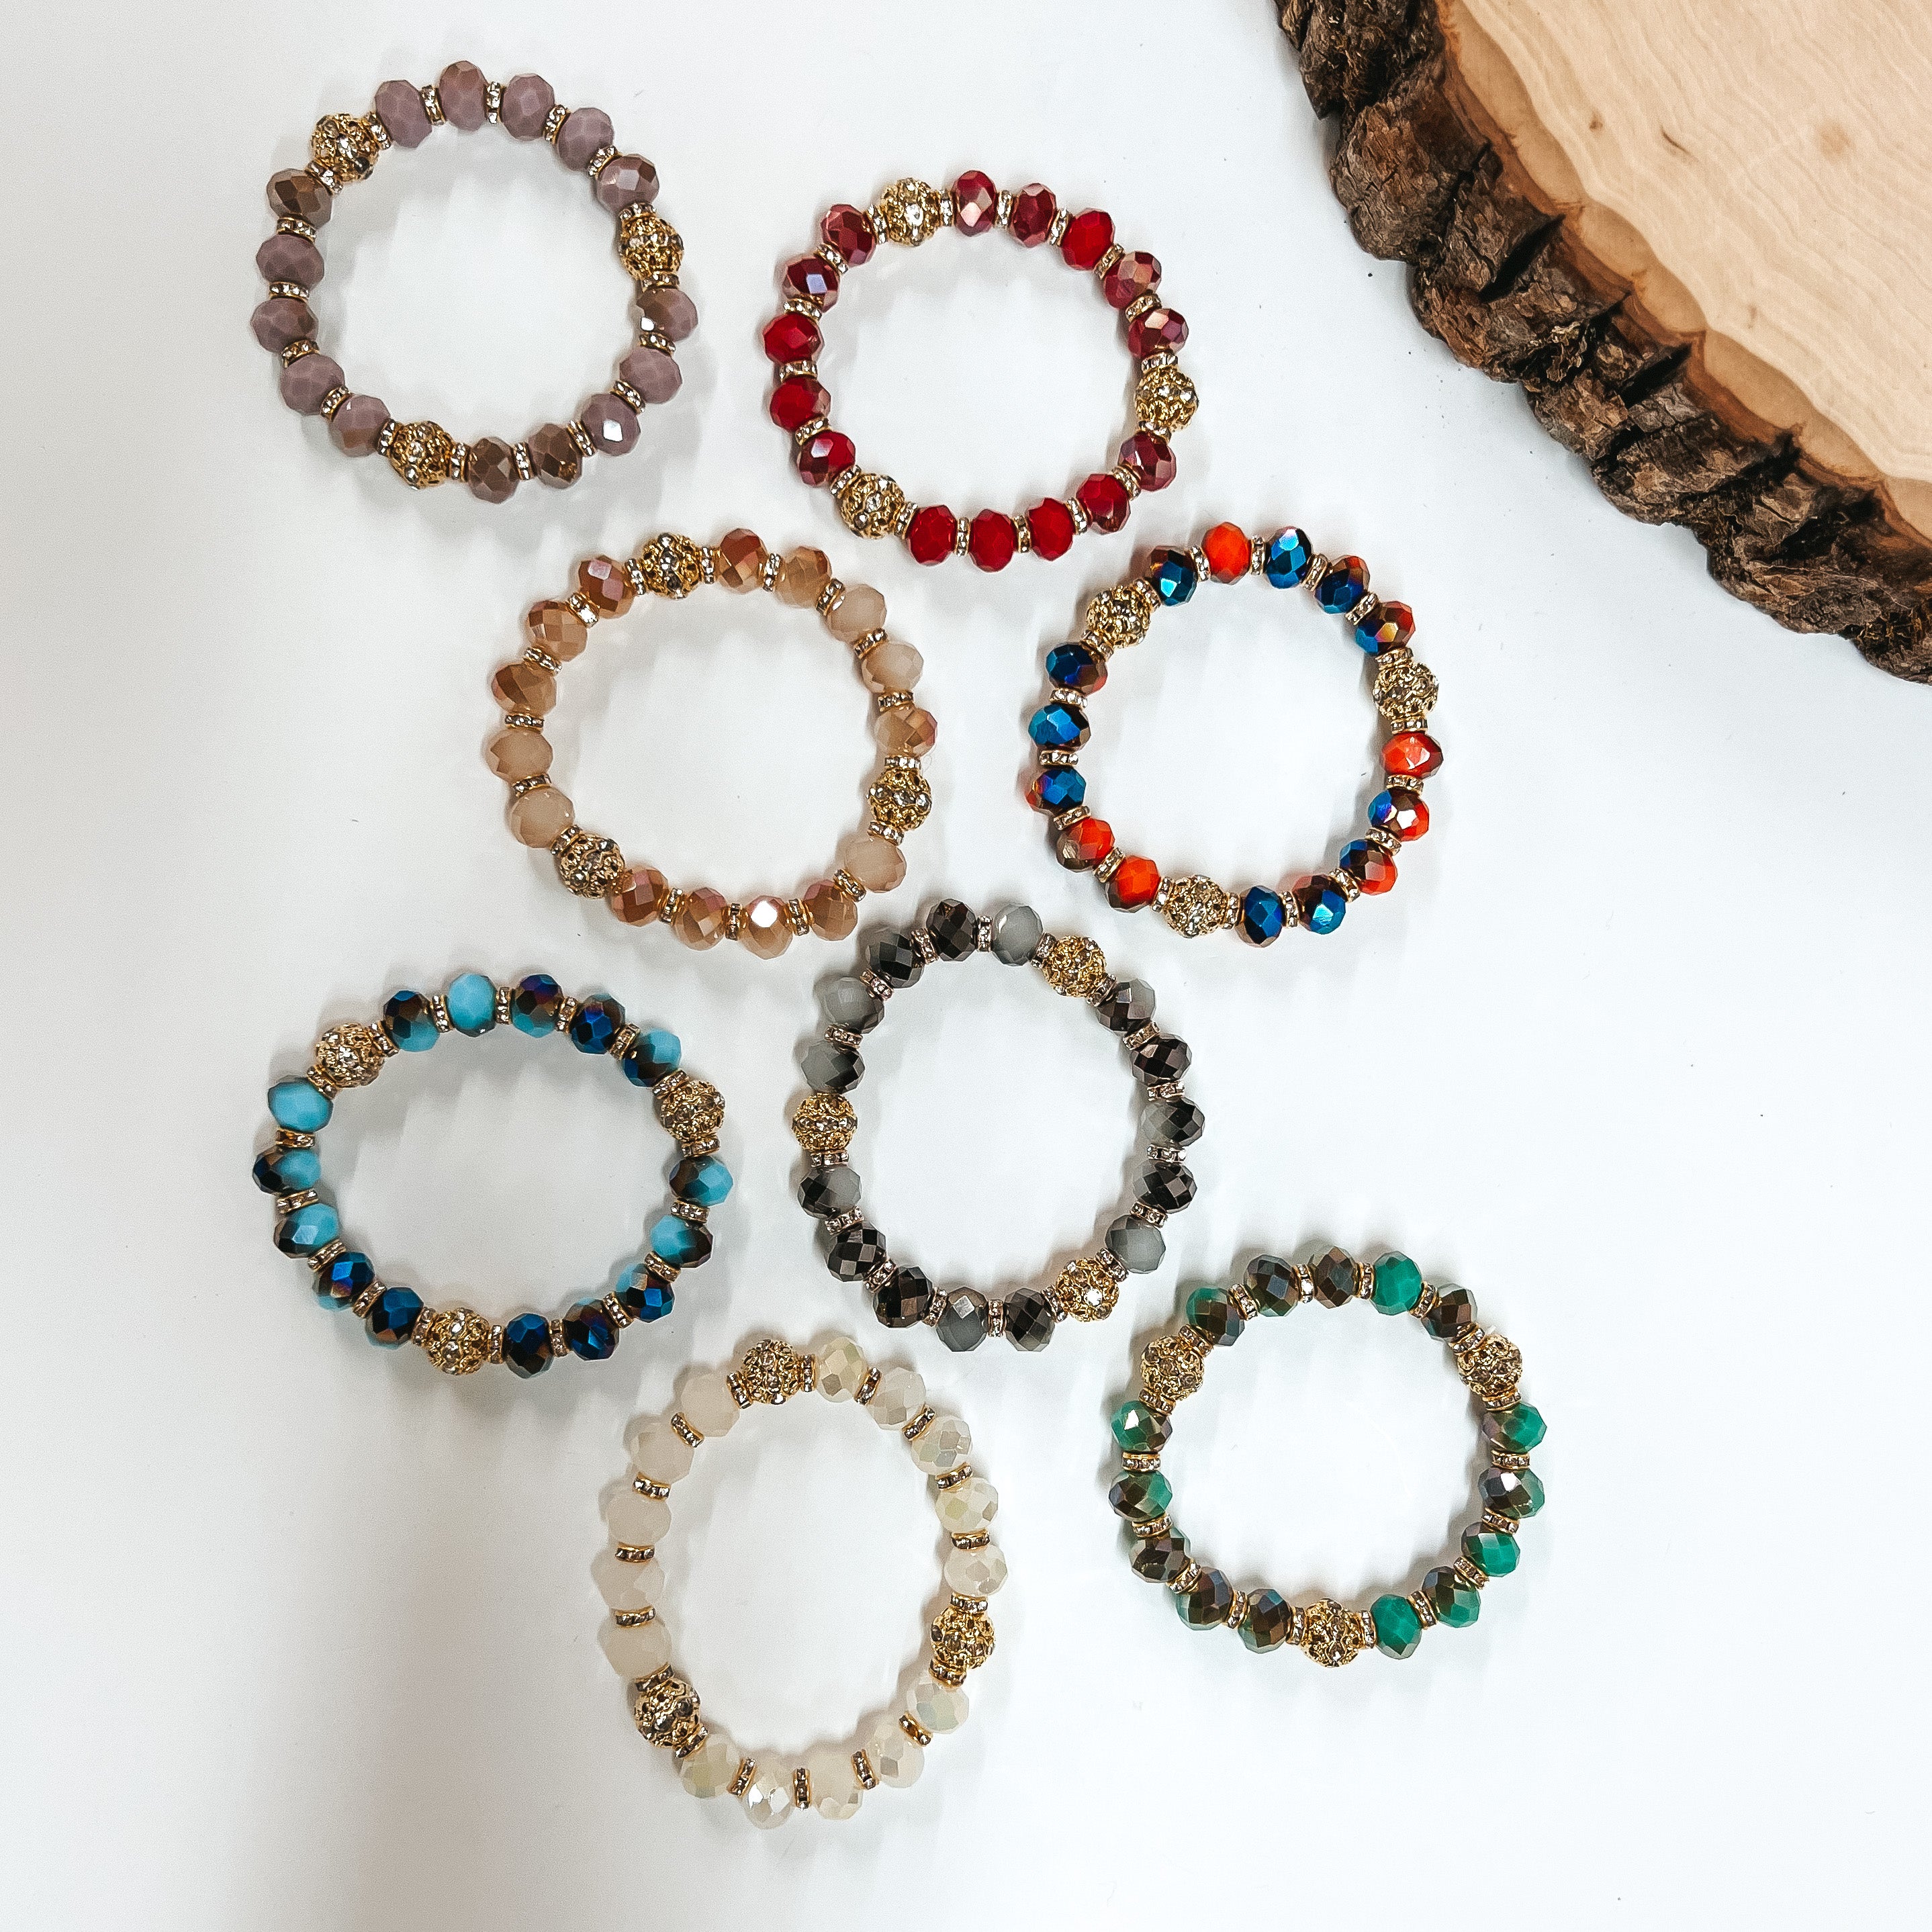 There are eight crystal beaded bracelets placed on a white background with a slab in the corner as decor. There are different color combinations and textures.